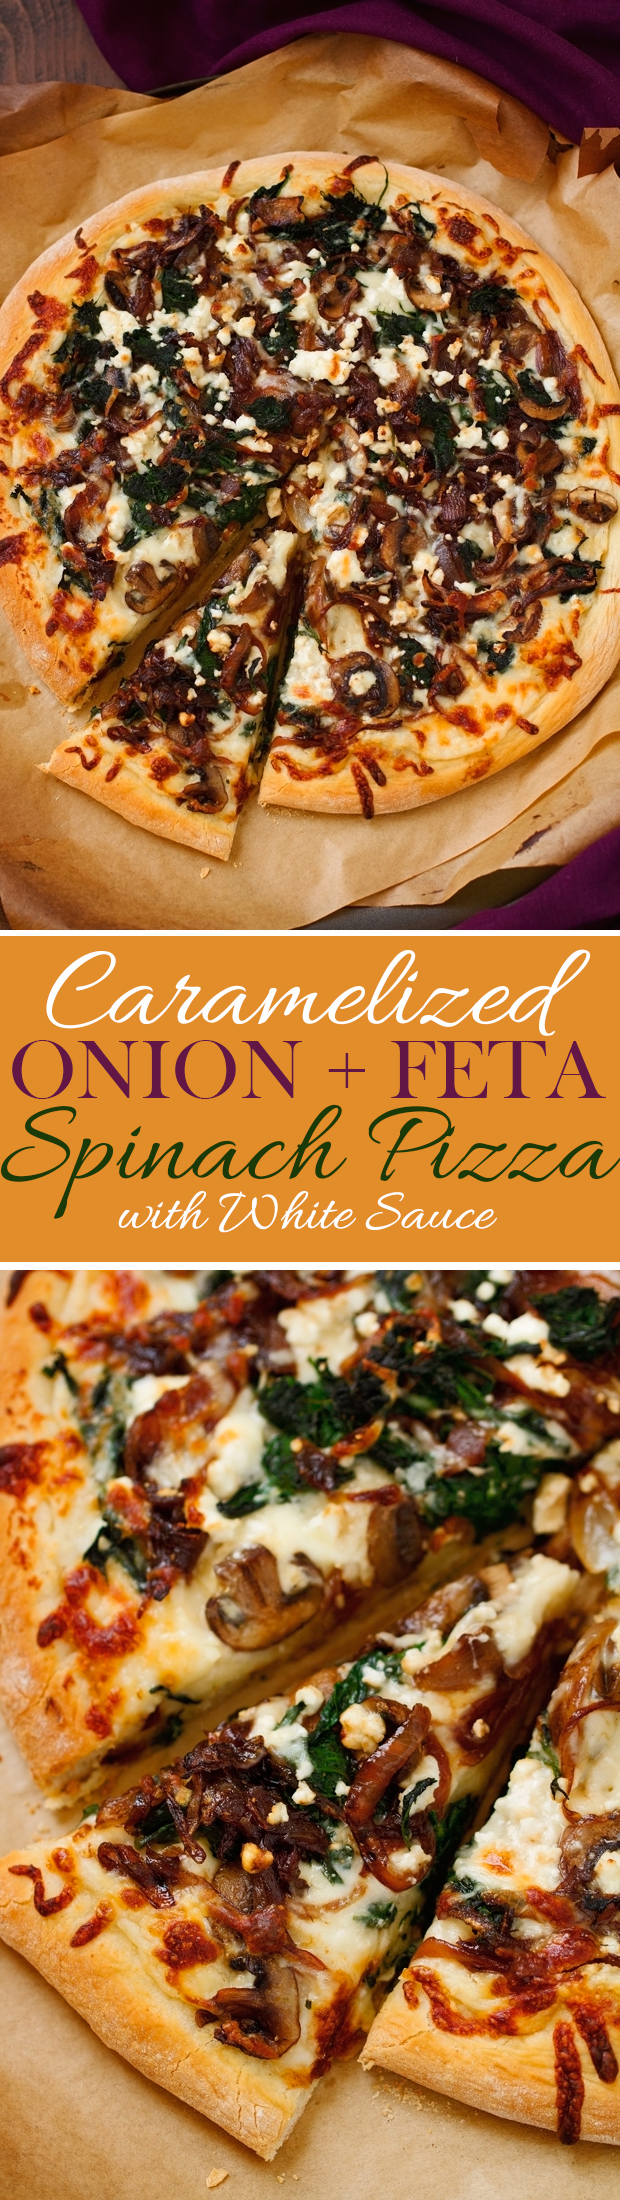 Caramelized Onion Feta Spinach Pizza with creamy white sauce! This pizza tastes like you ordered it at a fancy restaurant But it's simple to make at home! #pizza #caramelizedonions #spinachpizza #greekpizza | Littlespicejar.com @Littlespicejar